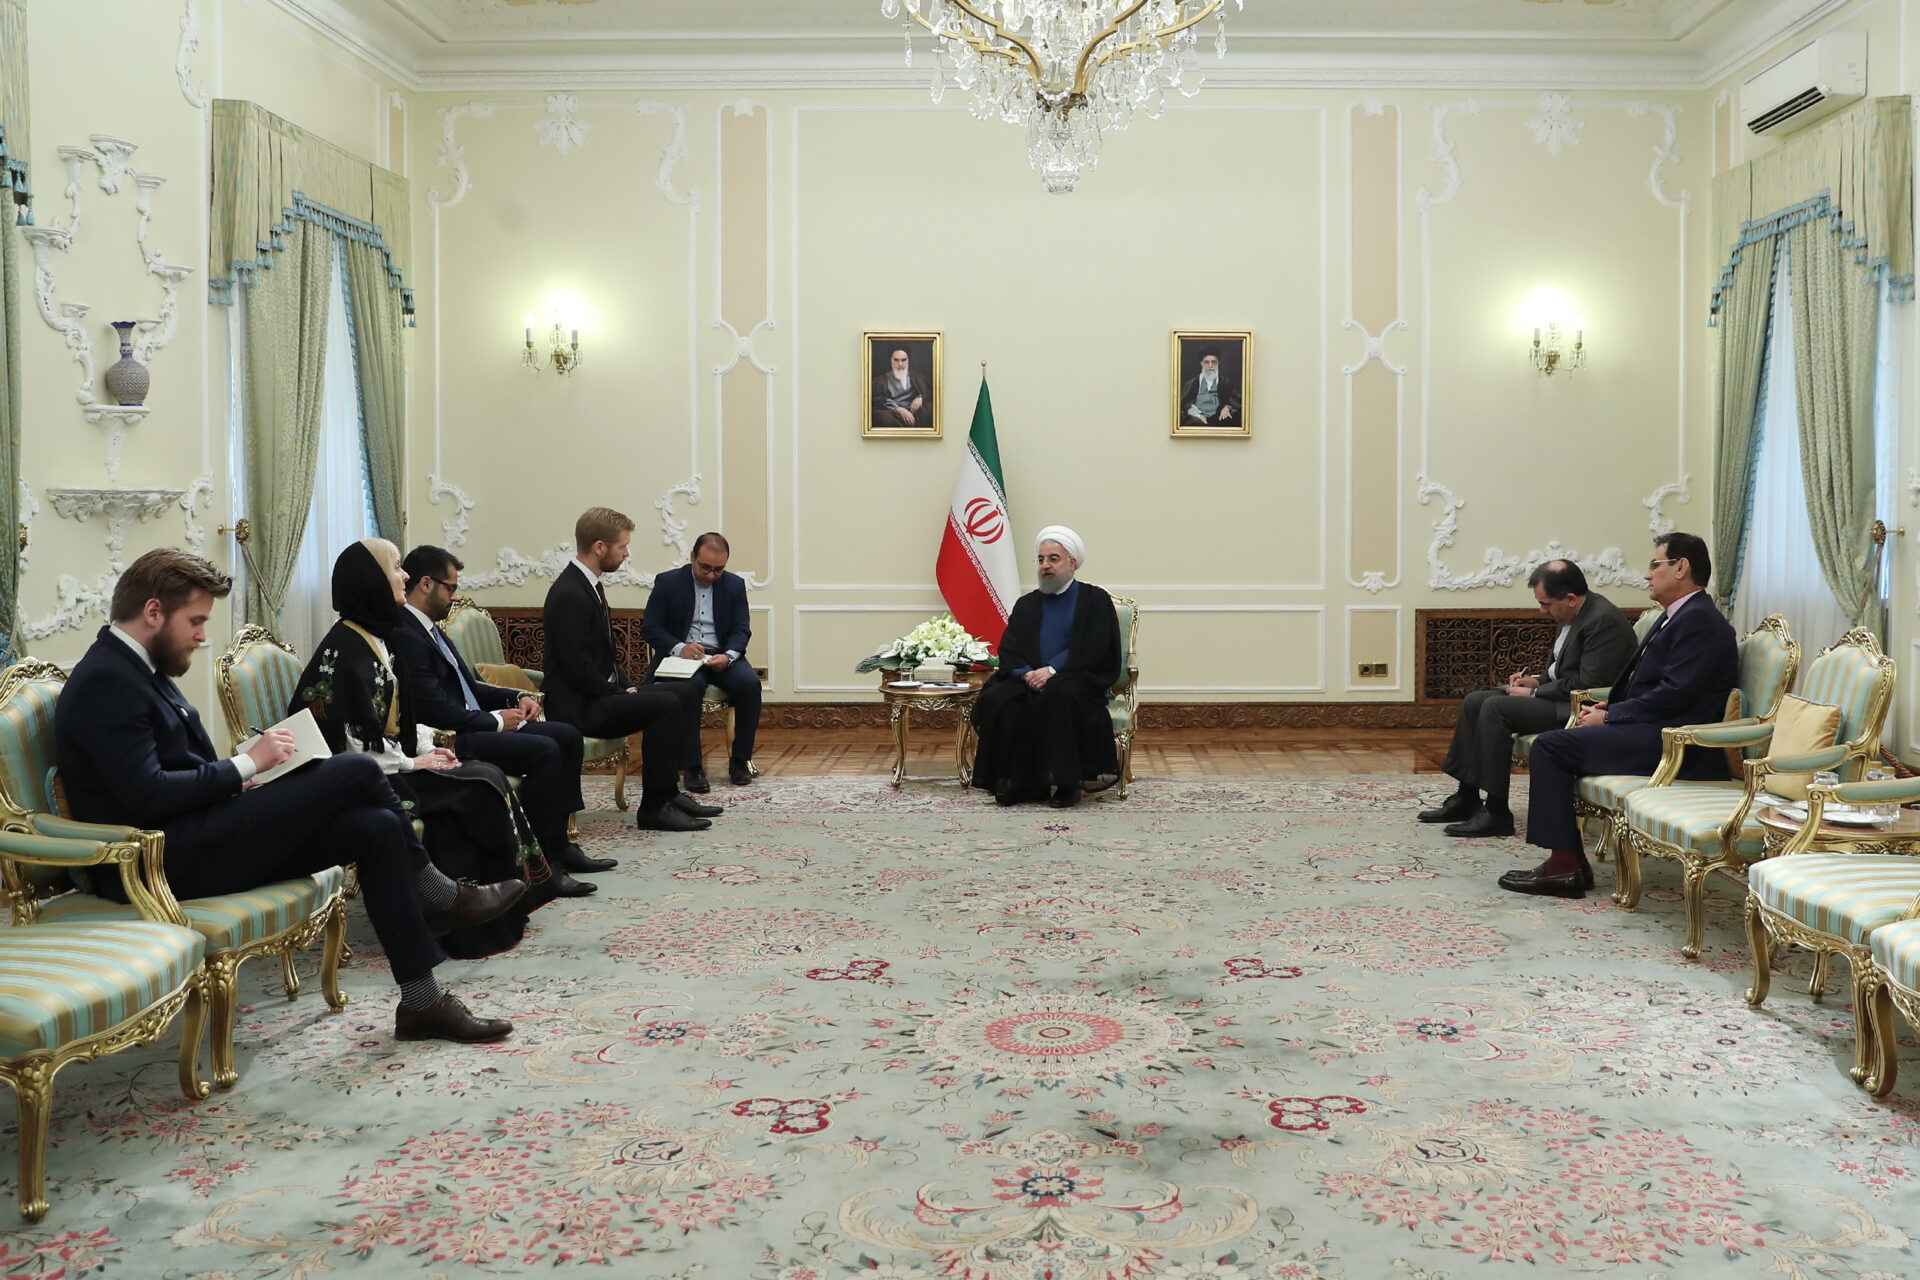 Ambassadors of 5 Countries Submit Credentials to Iran President